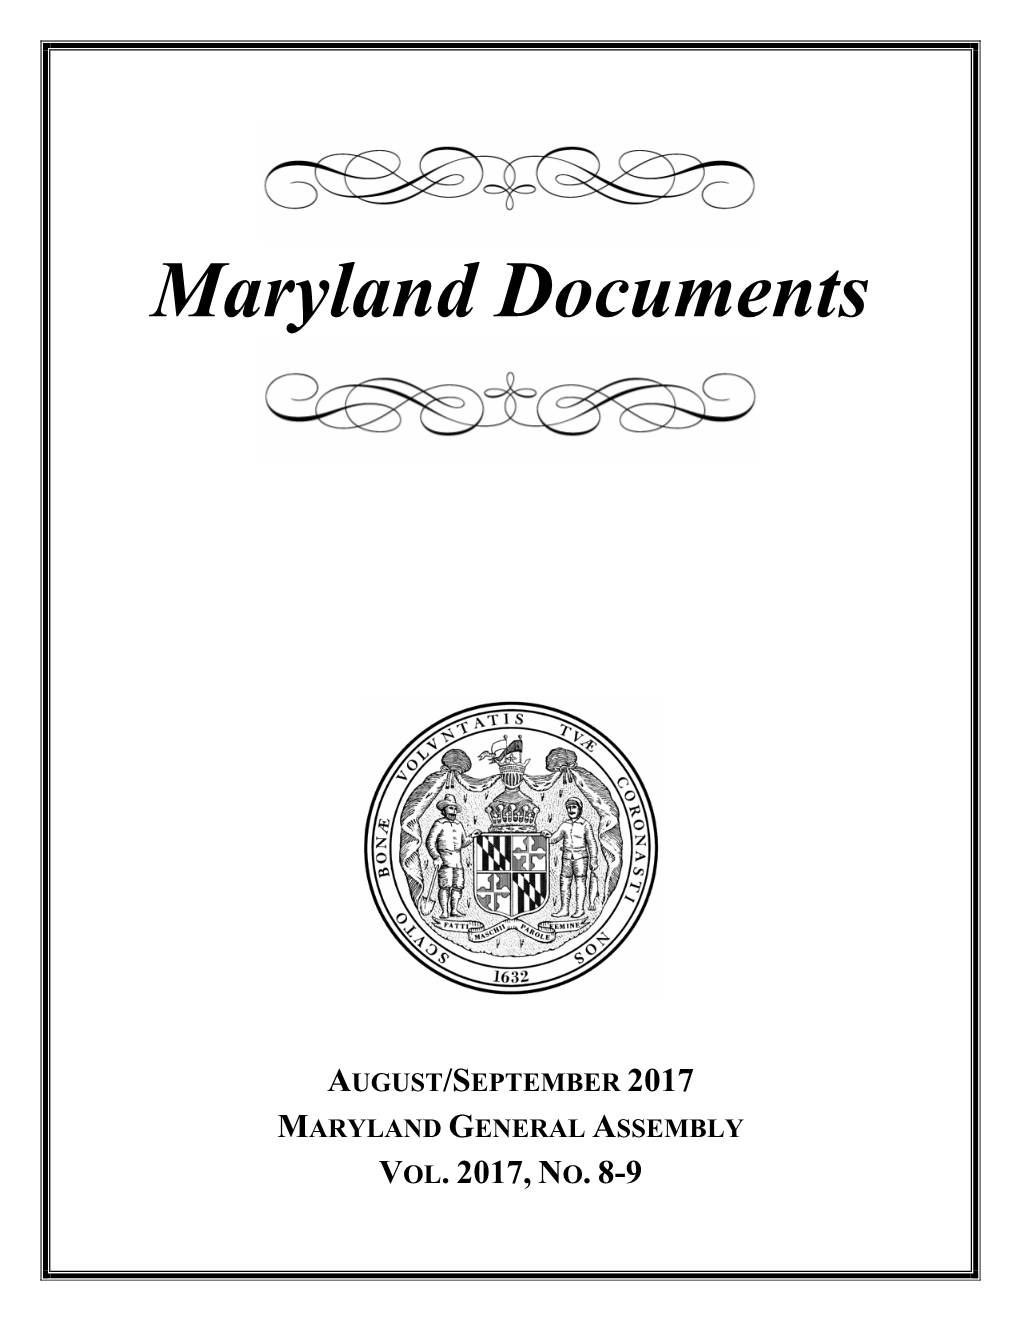 Maryland Documents, Vol. 2017 No. 8-9, August/September 2017 1